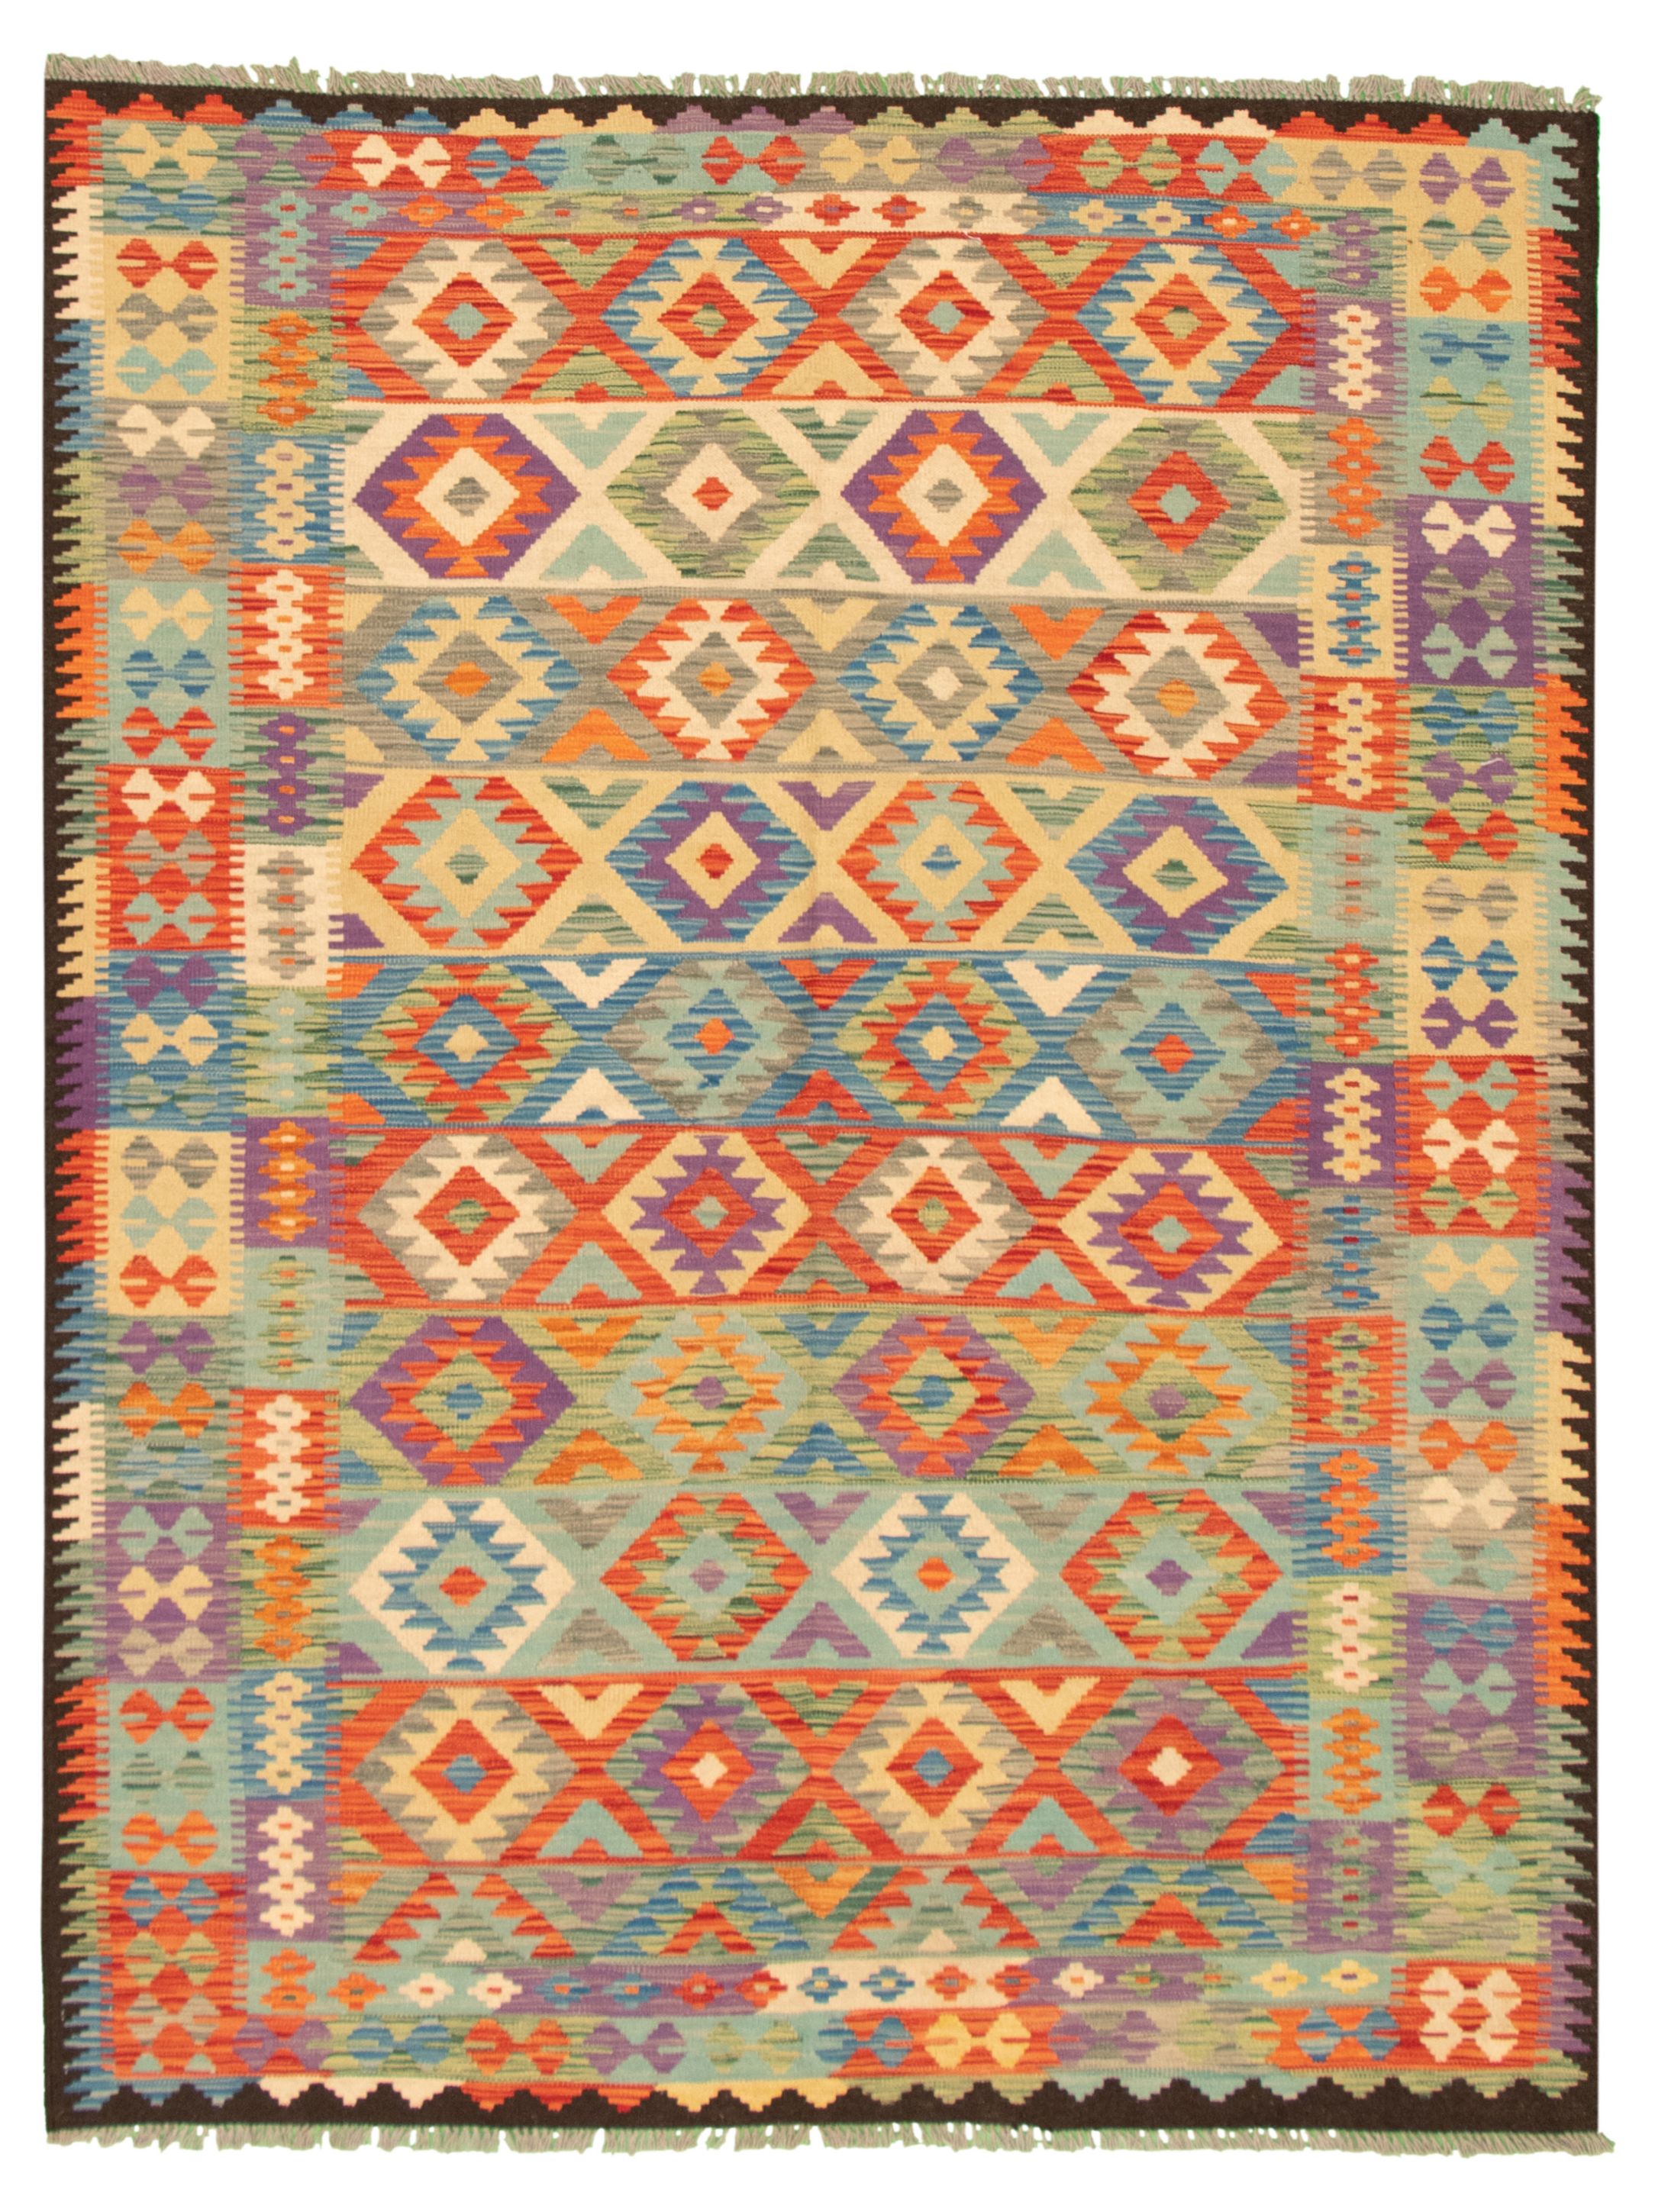 Hand woven Bold and Colorful  Multi Color Wool Kilim 5'11" x 7'10" Size: 5'11" x 7'10"  